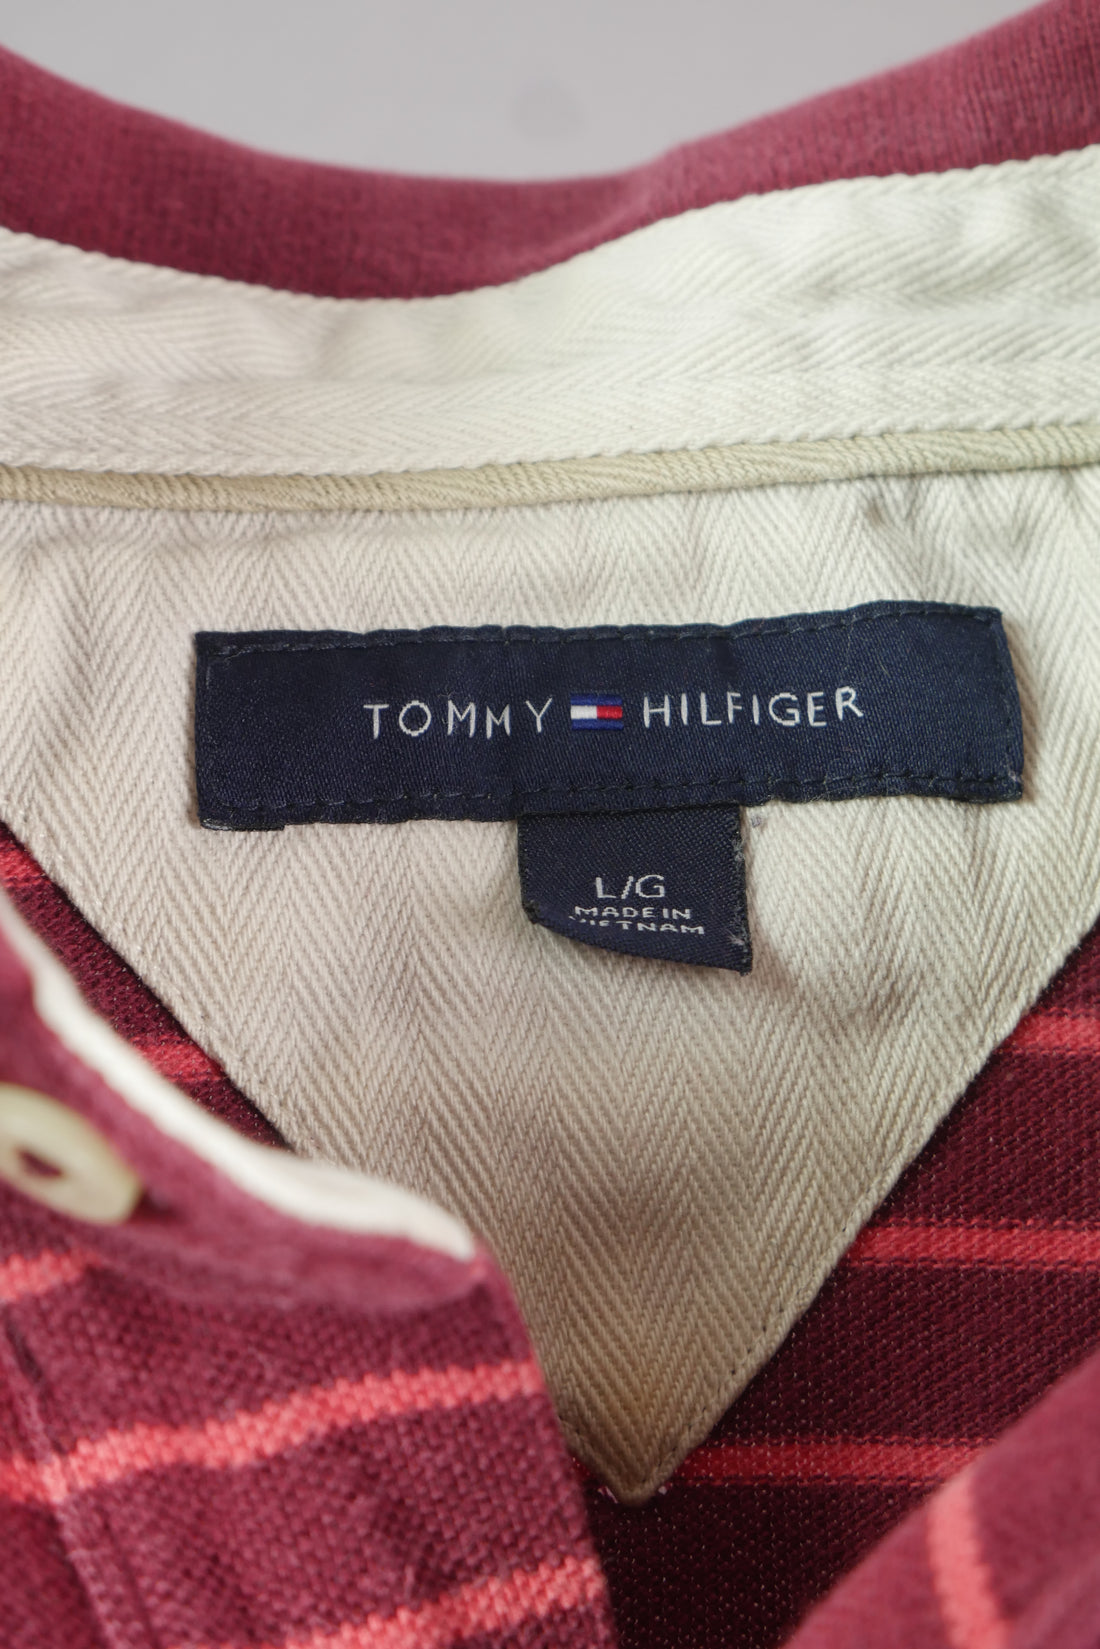 The Striped Tommy Hilfiger Polo Shirt (L)